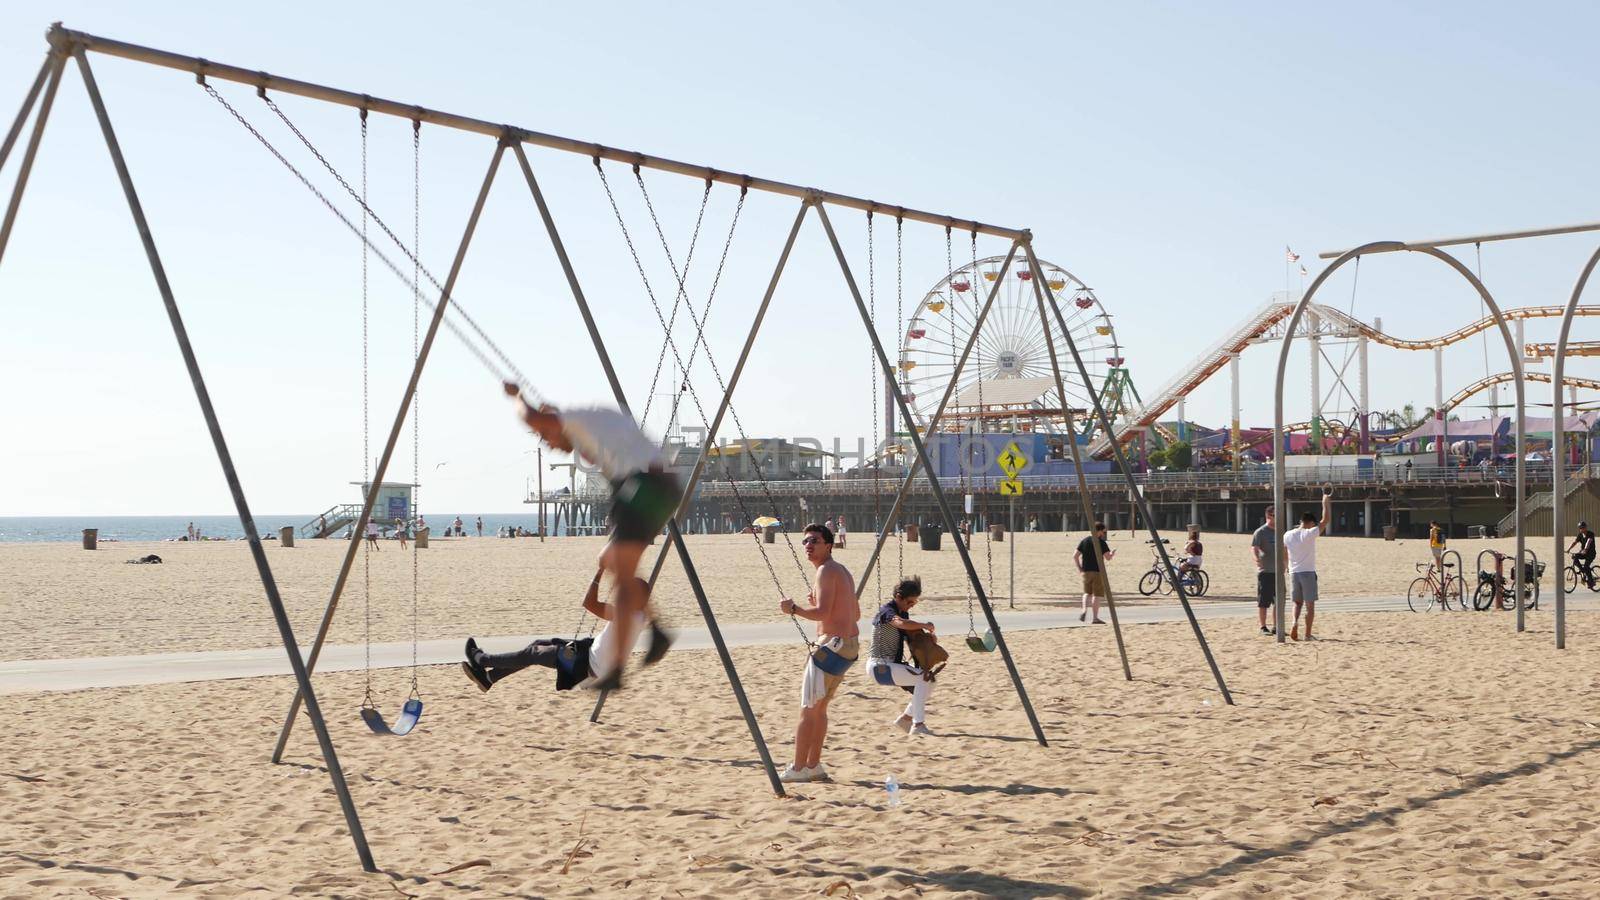 SANTA MONICA, LOS ANGELES CA USA - 28 OCT 2019: California summertime pacific ocean beach aesthetic, young people training and having fun on sports ground. Muscle beach and amusement park on pier.